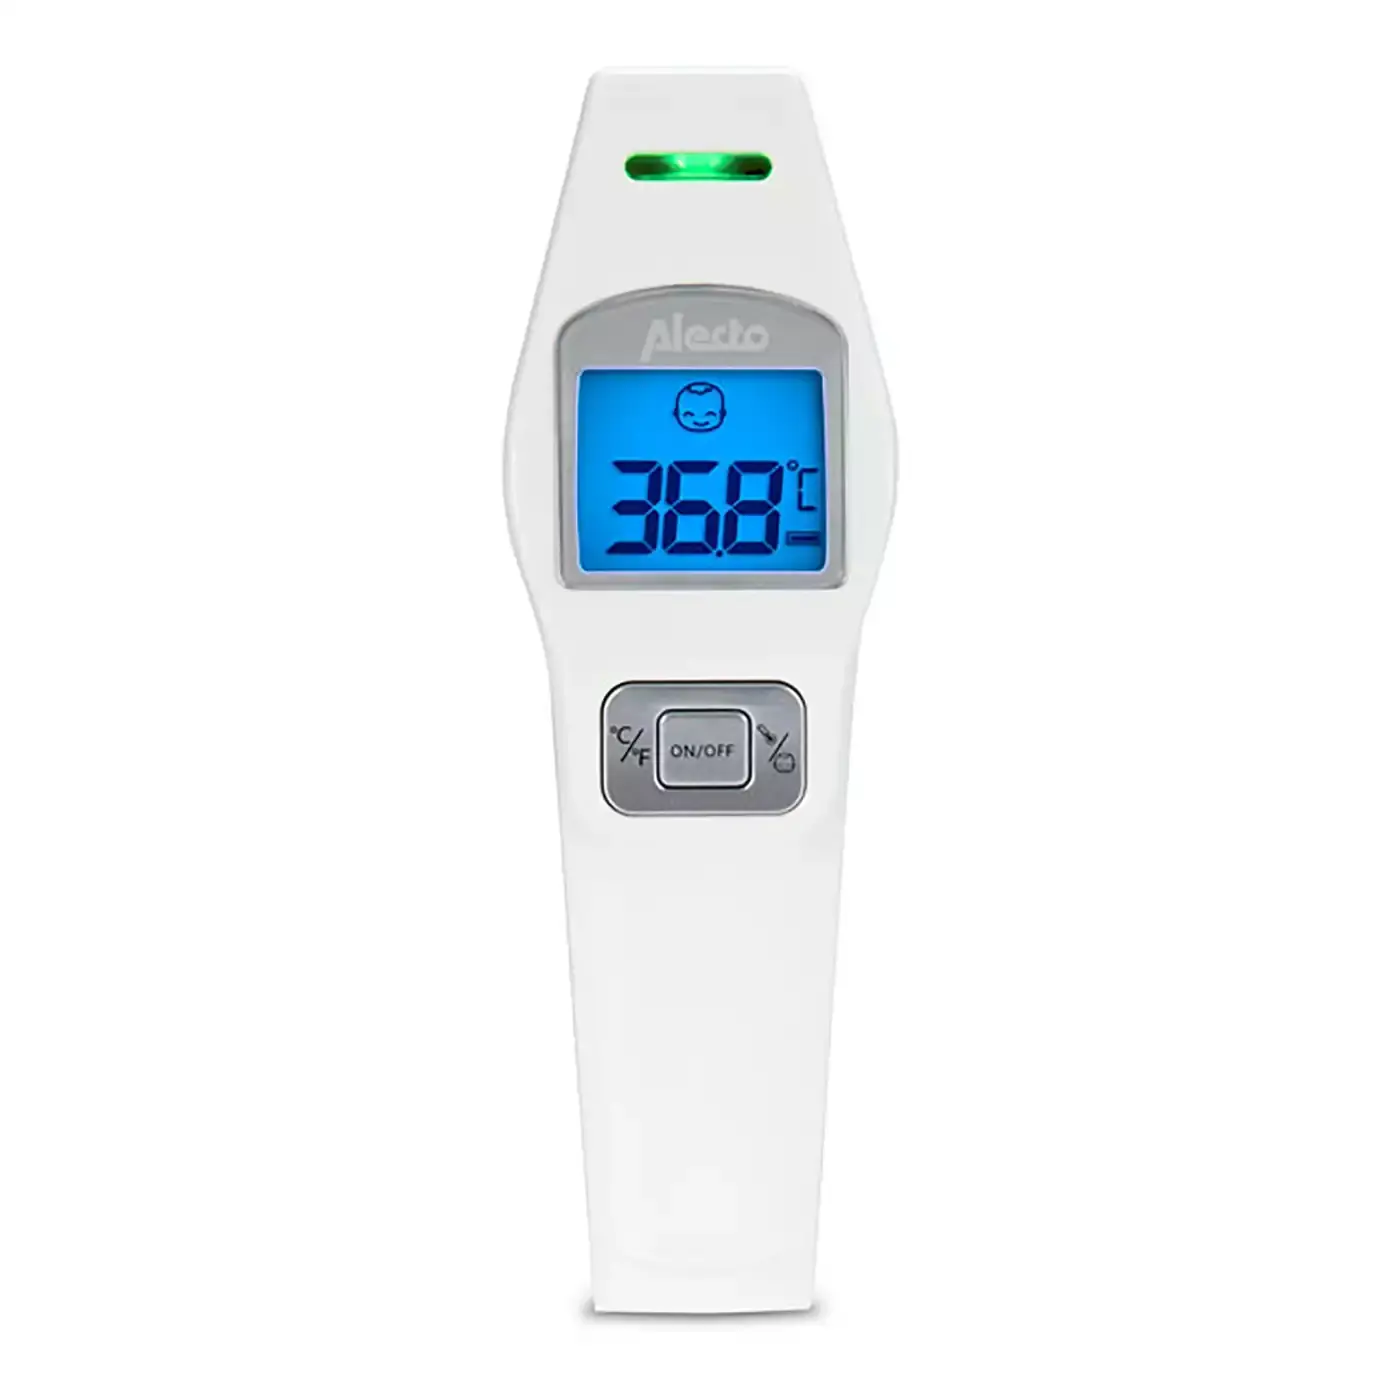 Infrarot Stirnthermometer Alecto baby 2000579712203 1